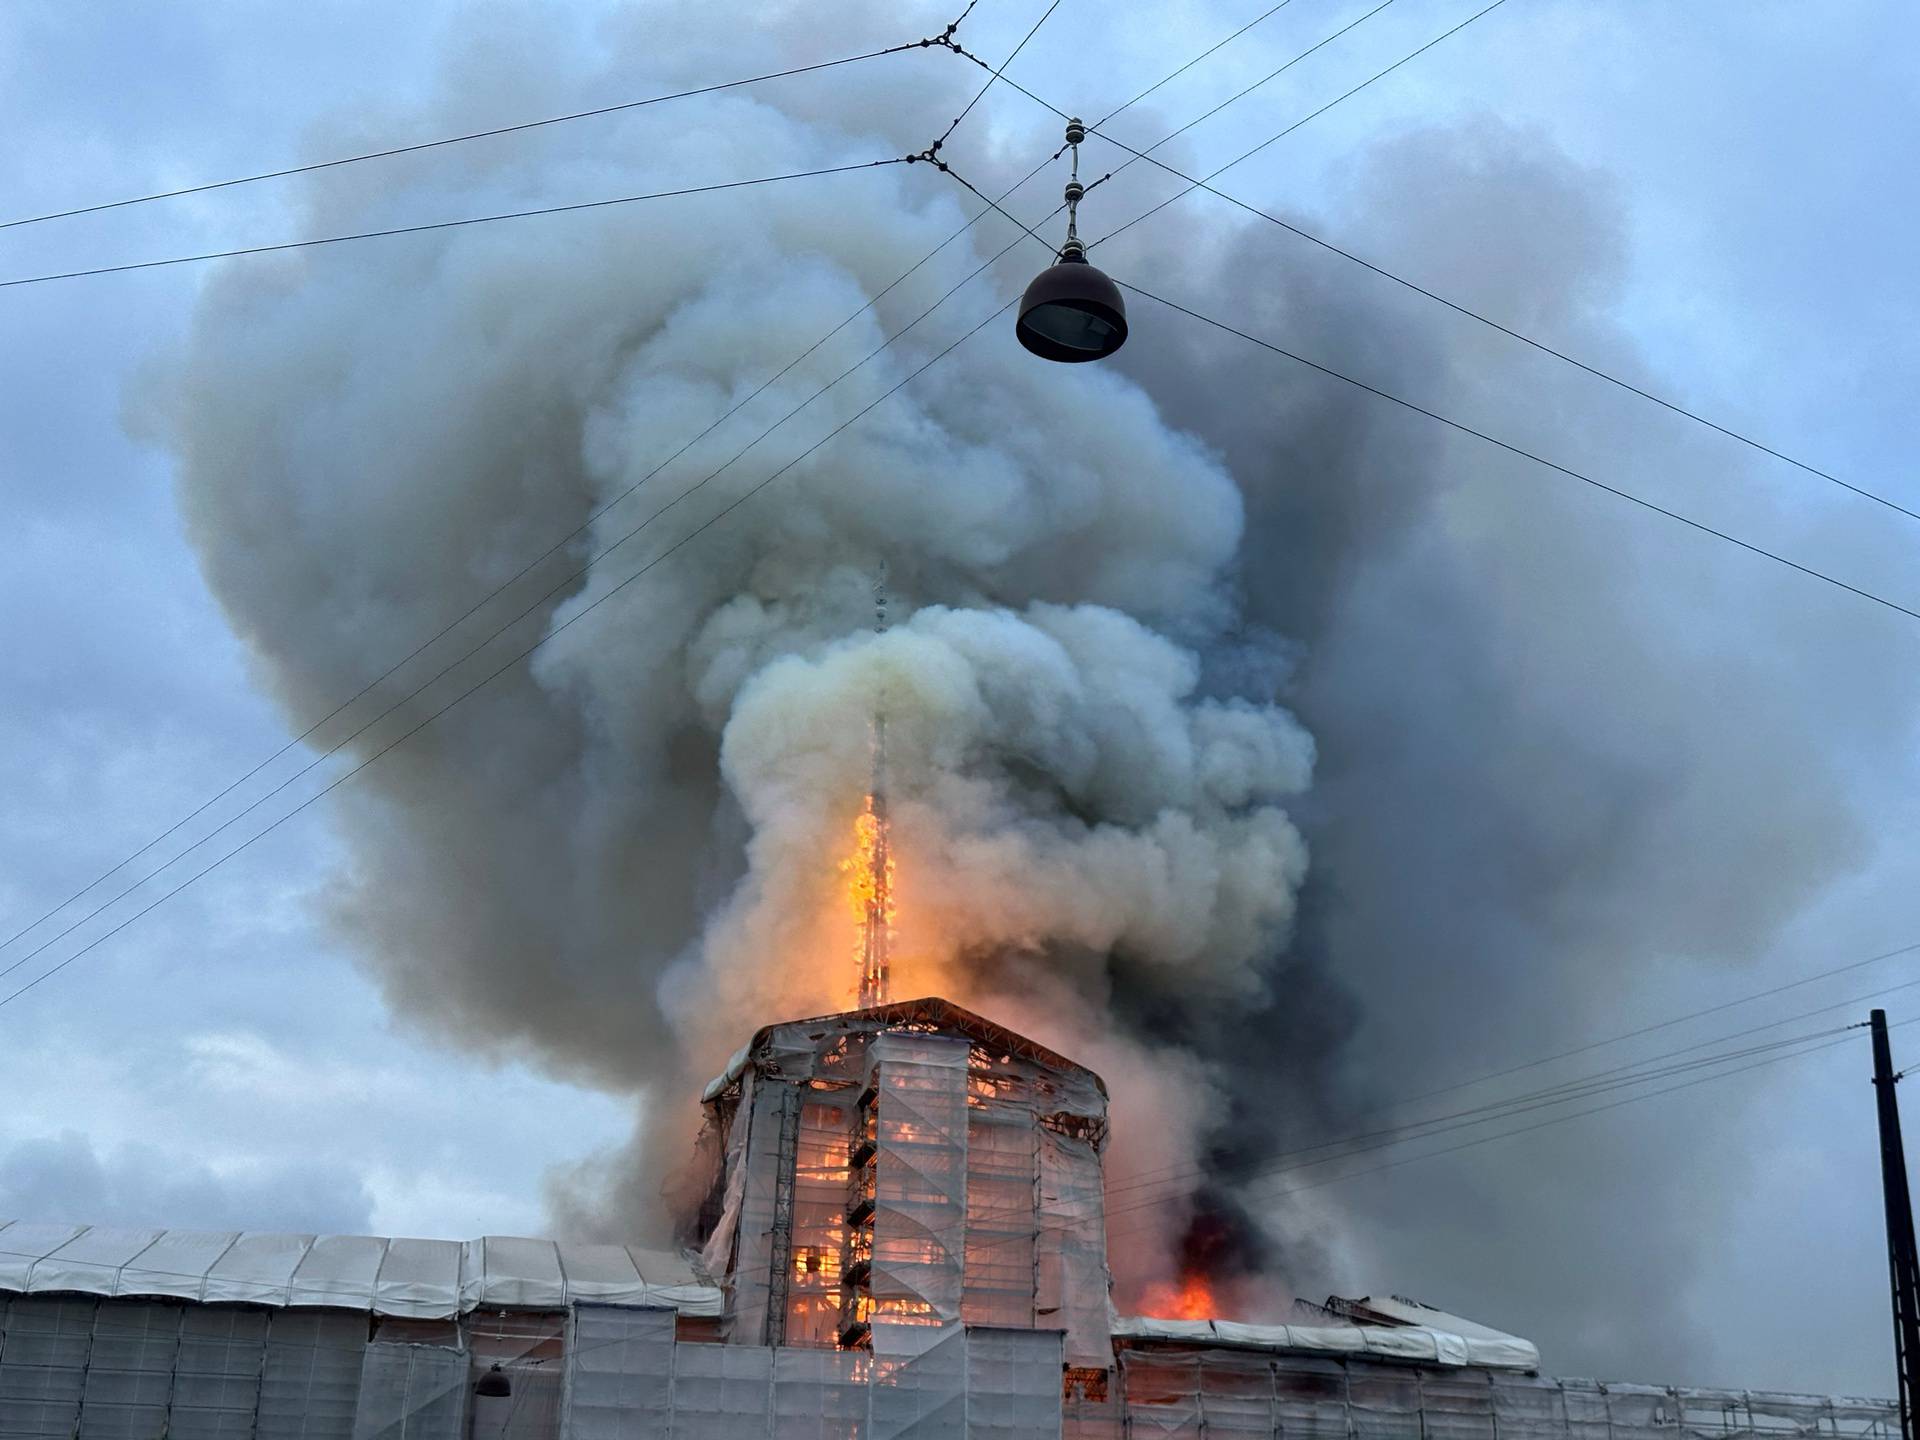 Smoke billows during a fire at the Old Stock Exchange, Boersen, in Copenhagen